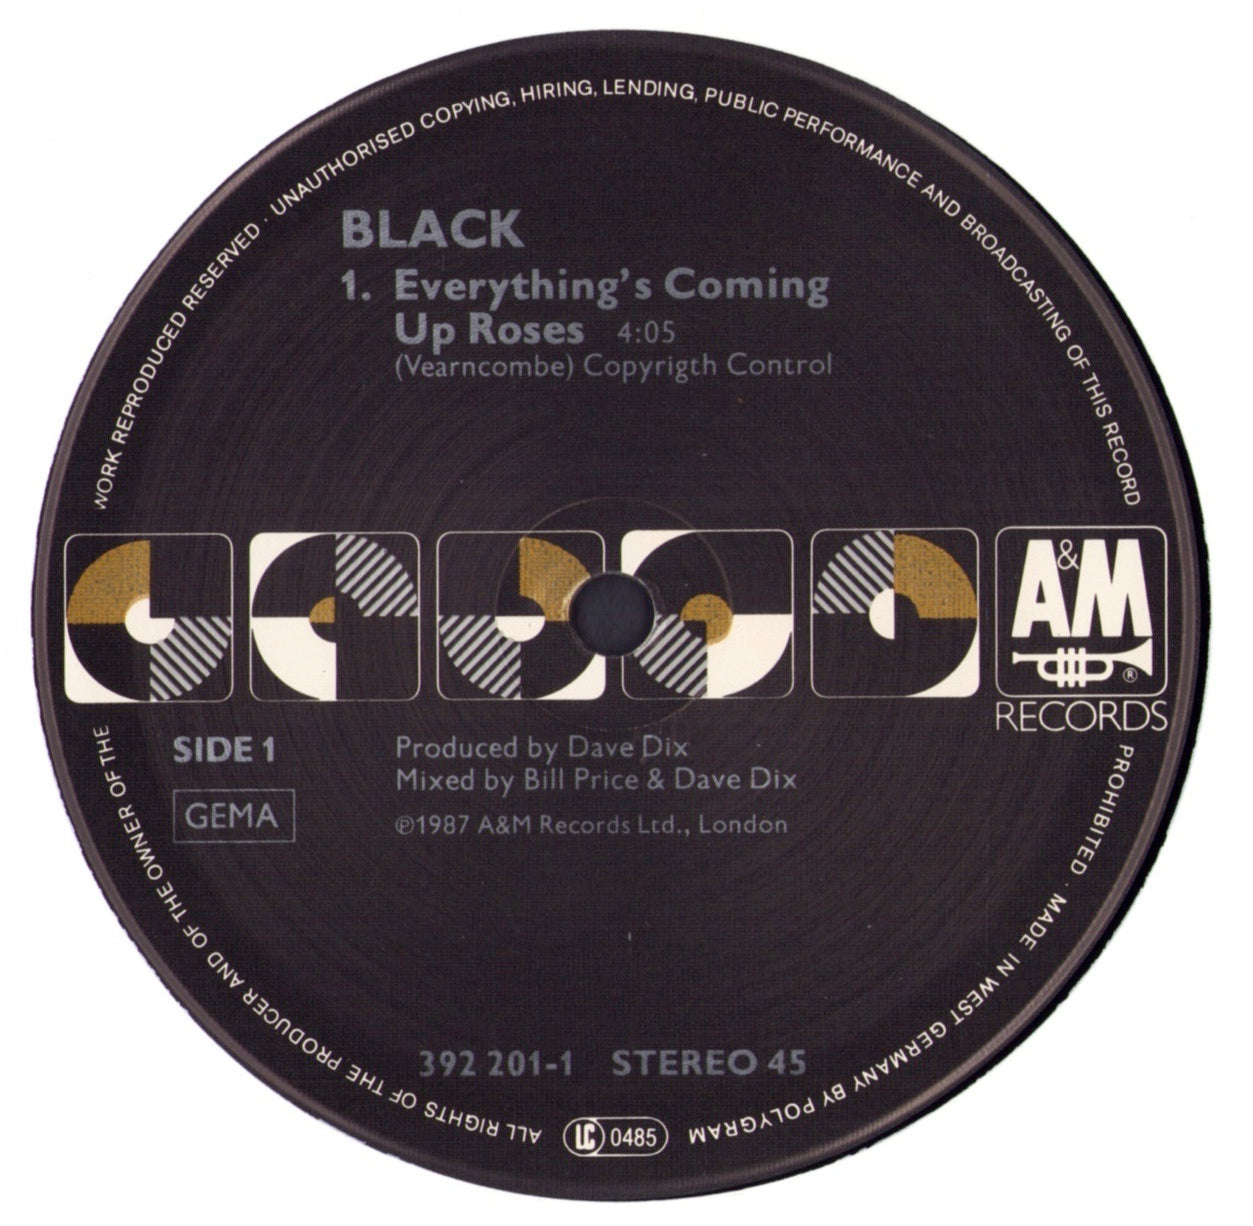 Black - Everything's Coming Up Roses Vinyl 12"